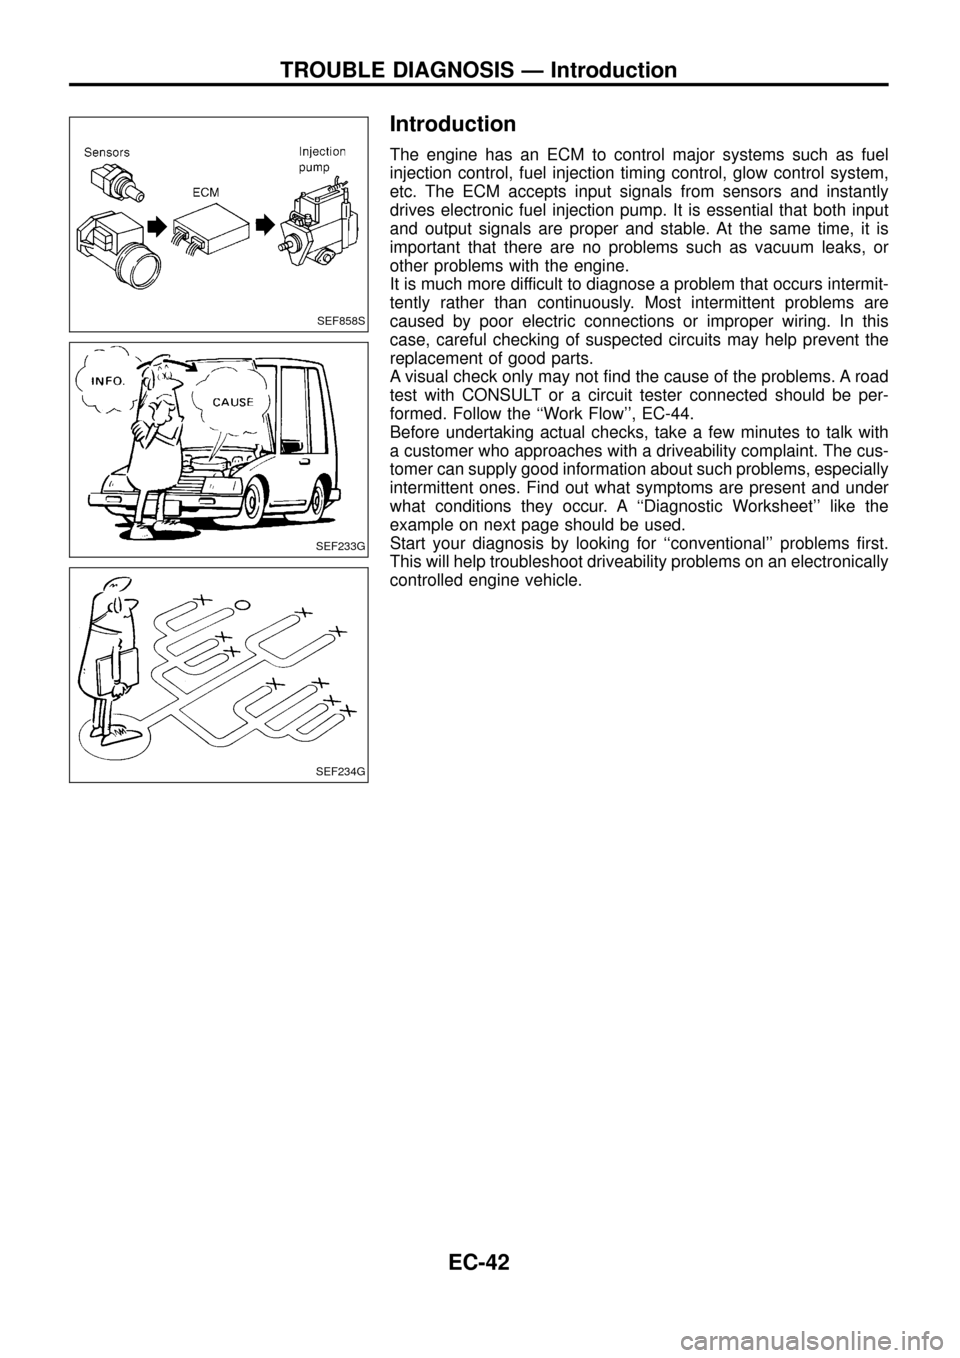 NISSAN PATROL 1998 Y61 / 5.G Engine Control Workshop Manual Introduction
The engine has an ECM to control major systems such as fuel
injection control, fuel injection timing control, glow control system,
etc. The ECM accepts input signals from sensors and inst